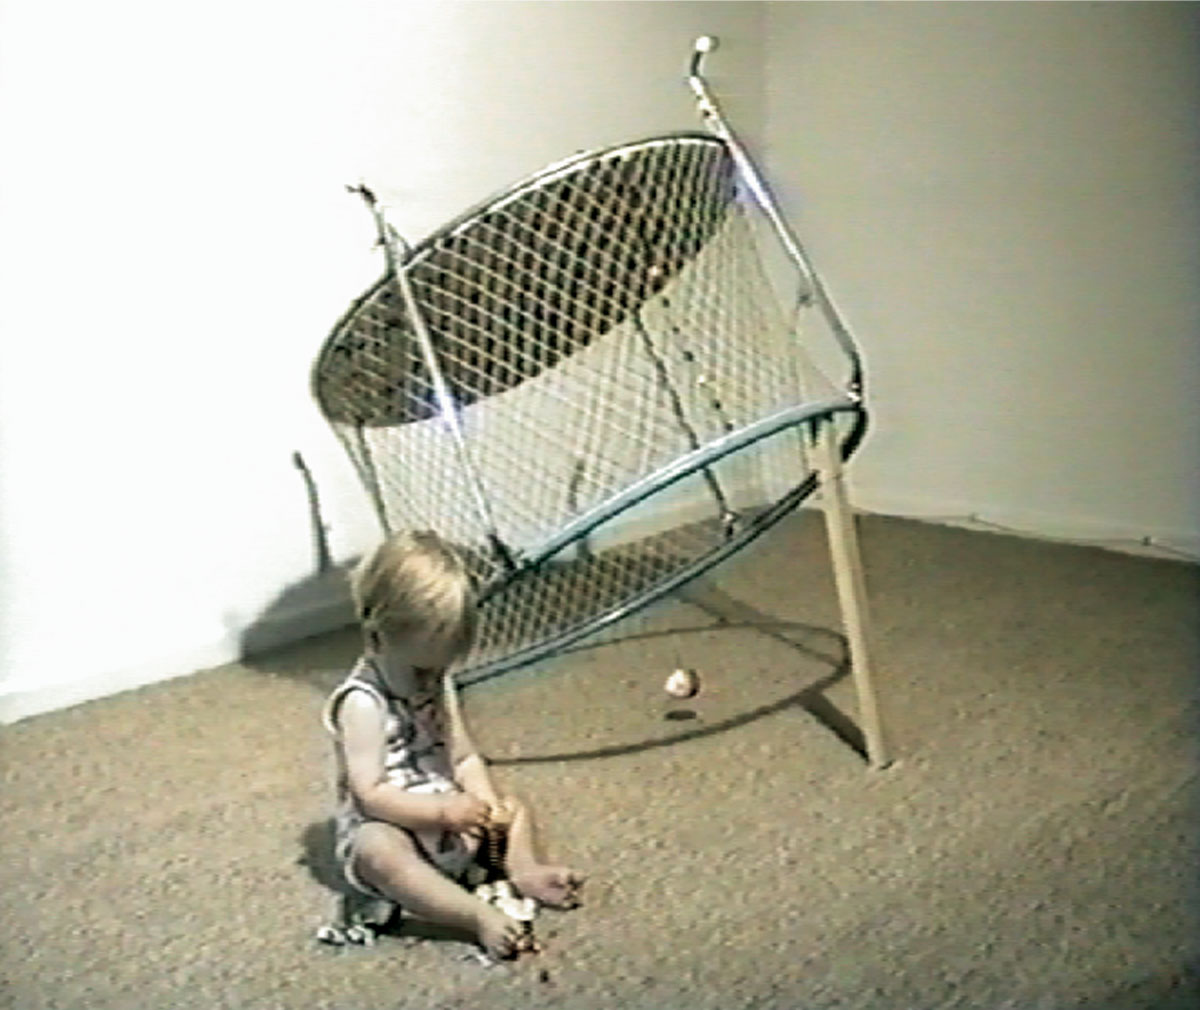 Carsten Höller, video stills from Jenny held her little daughter
twenty minutes under water, not to cause her any trouble, just to see the funny
bubbles, 1992.